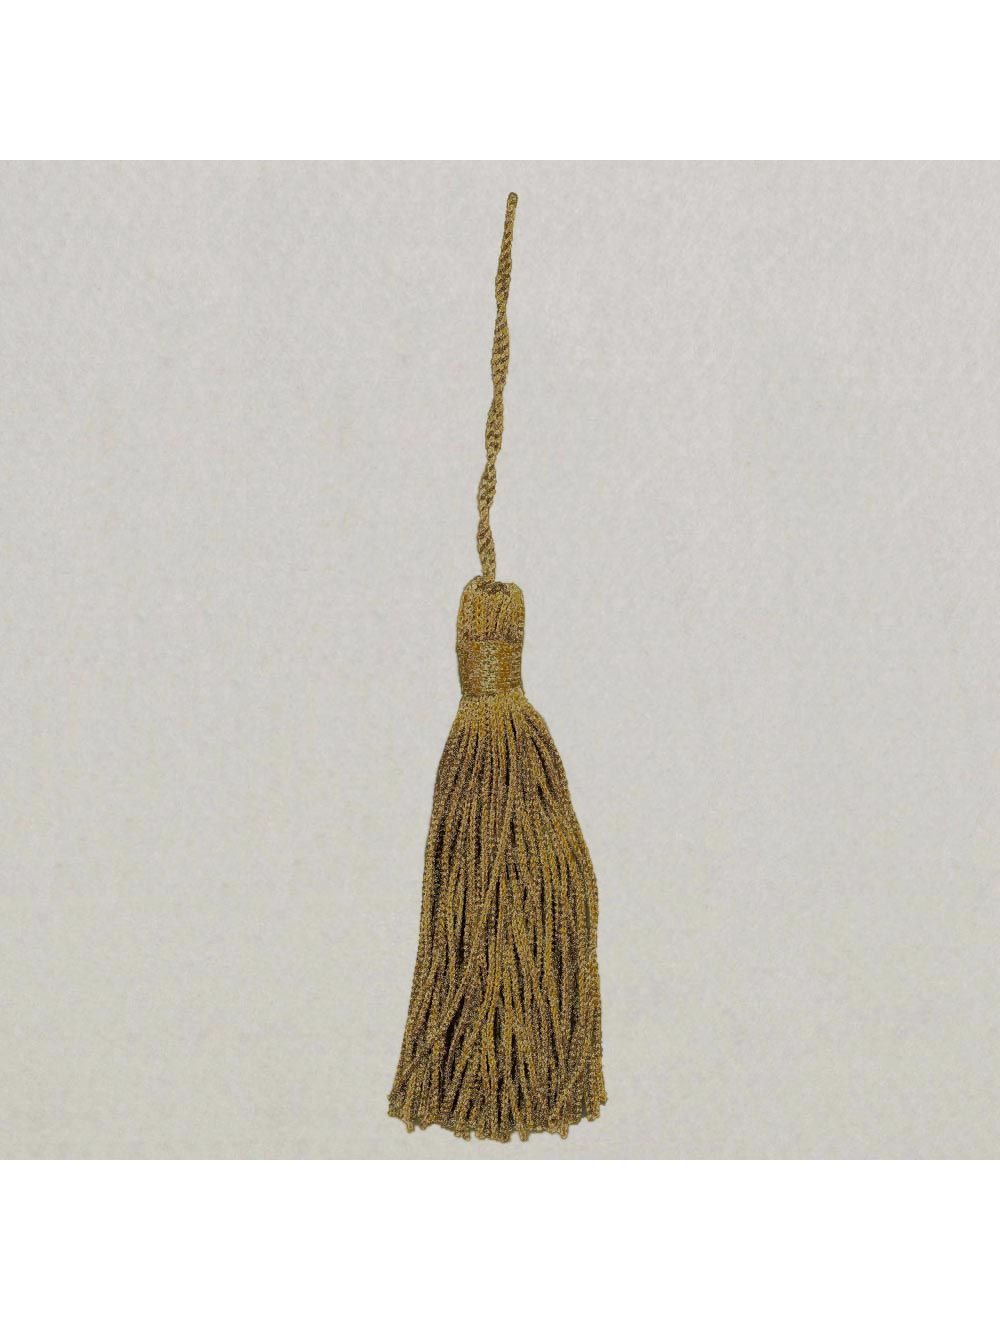 Antique Gold Tassels Furnishing Products Calico Laine